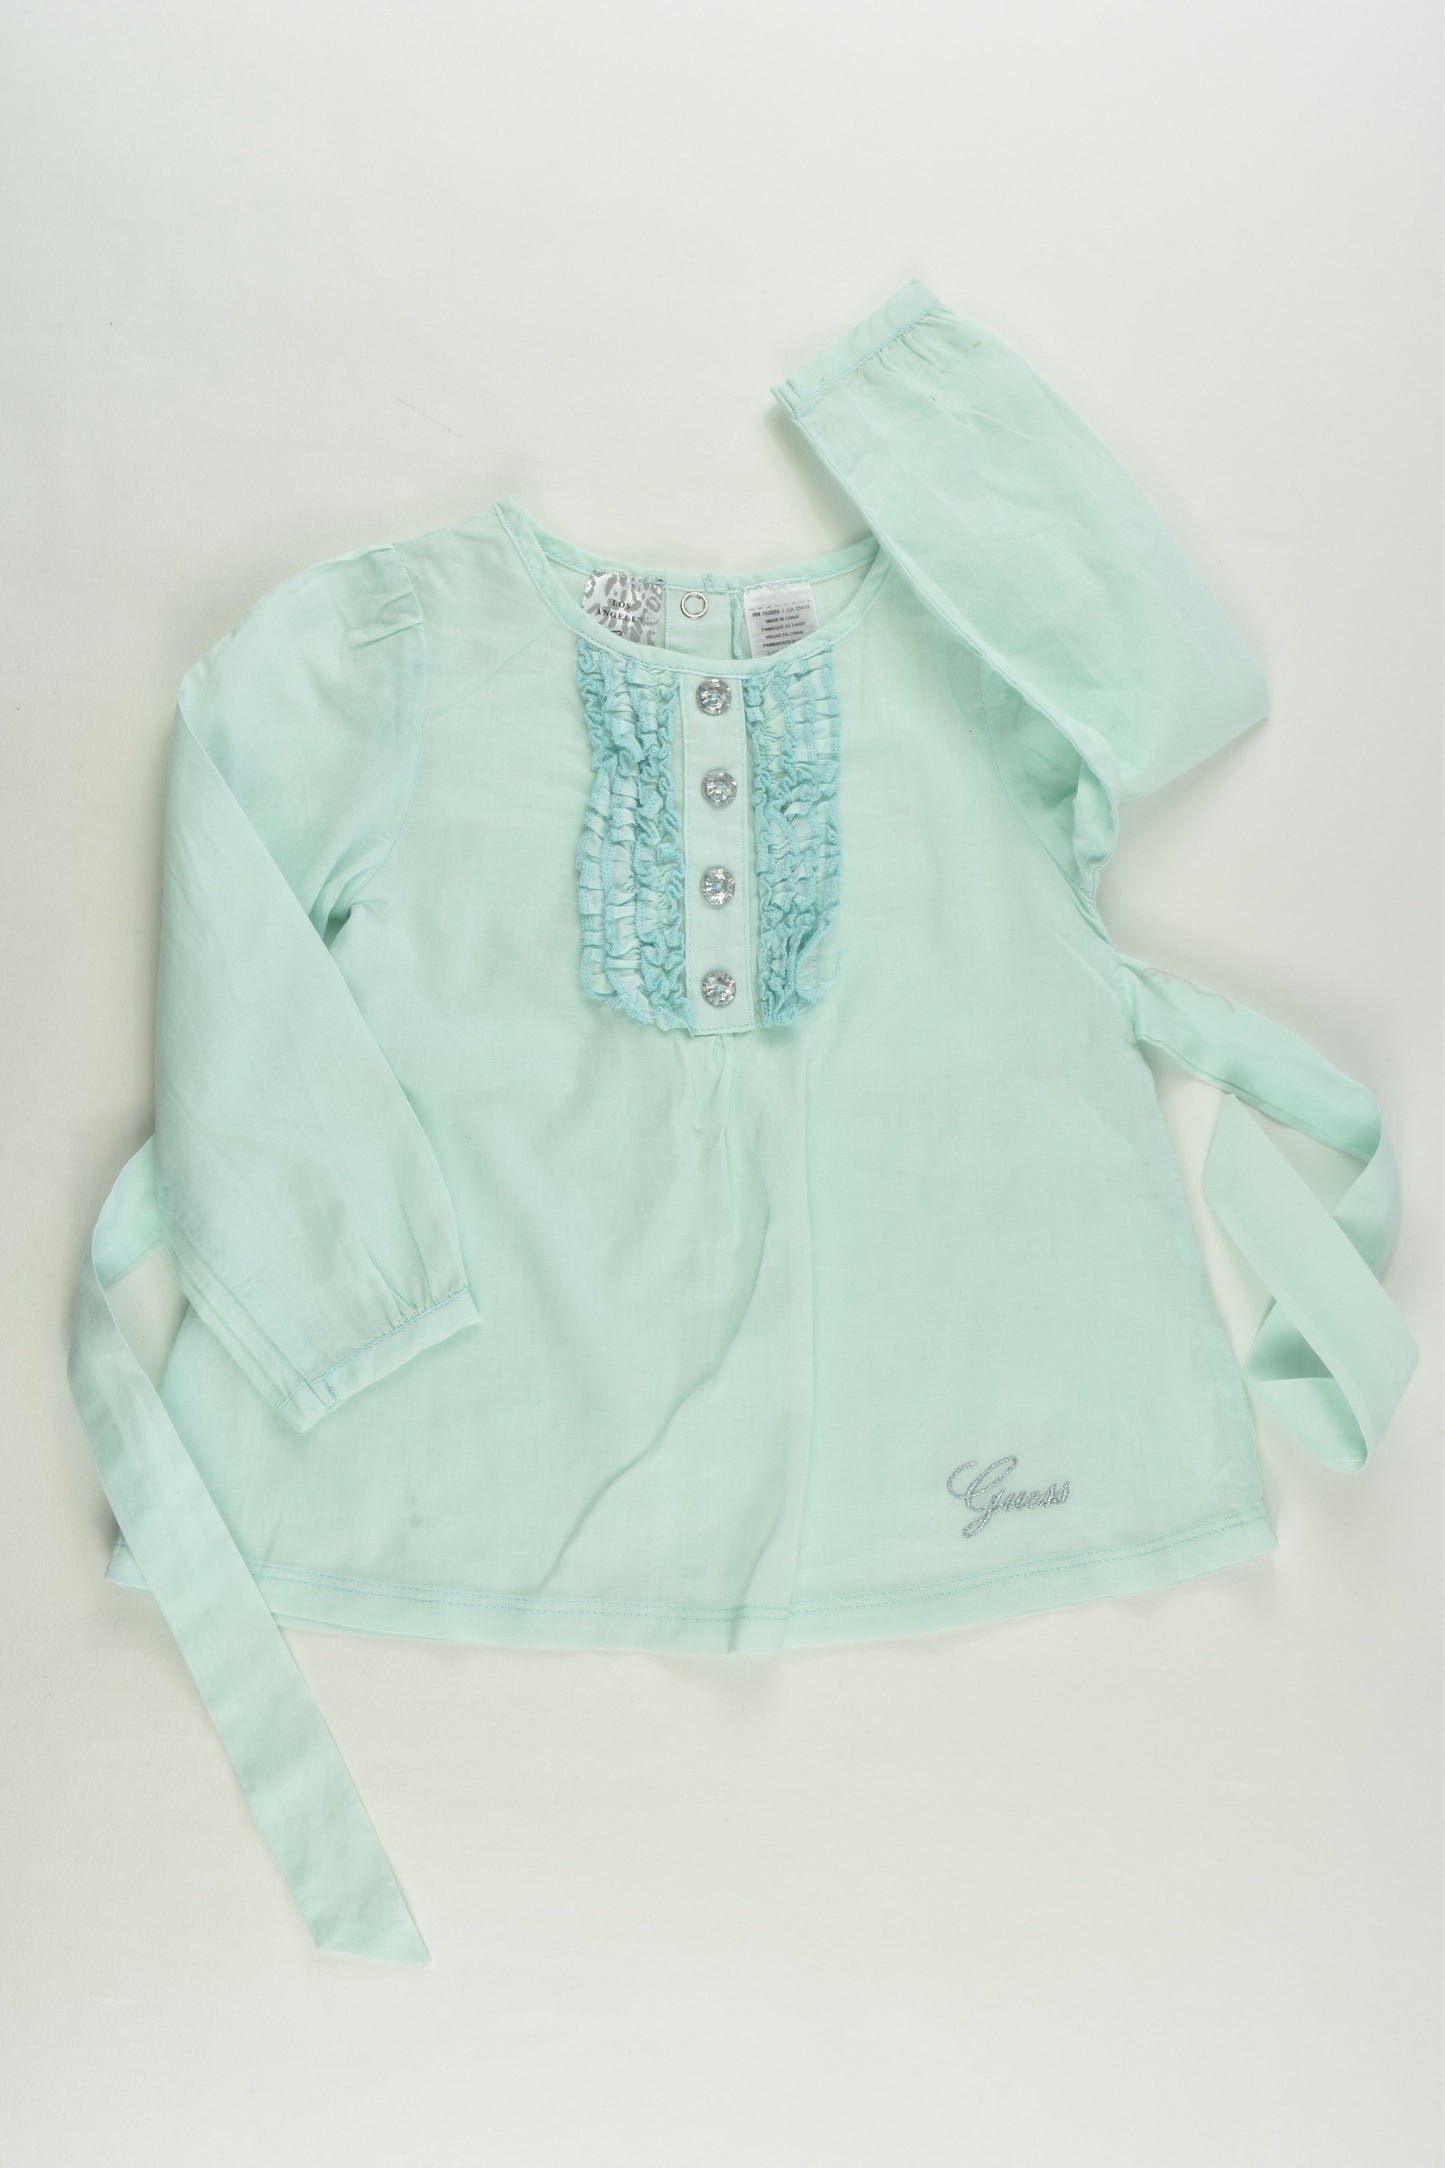 Guess Size 1 (18 months) Blouse